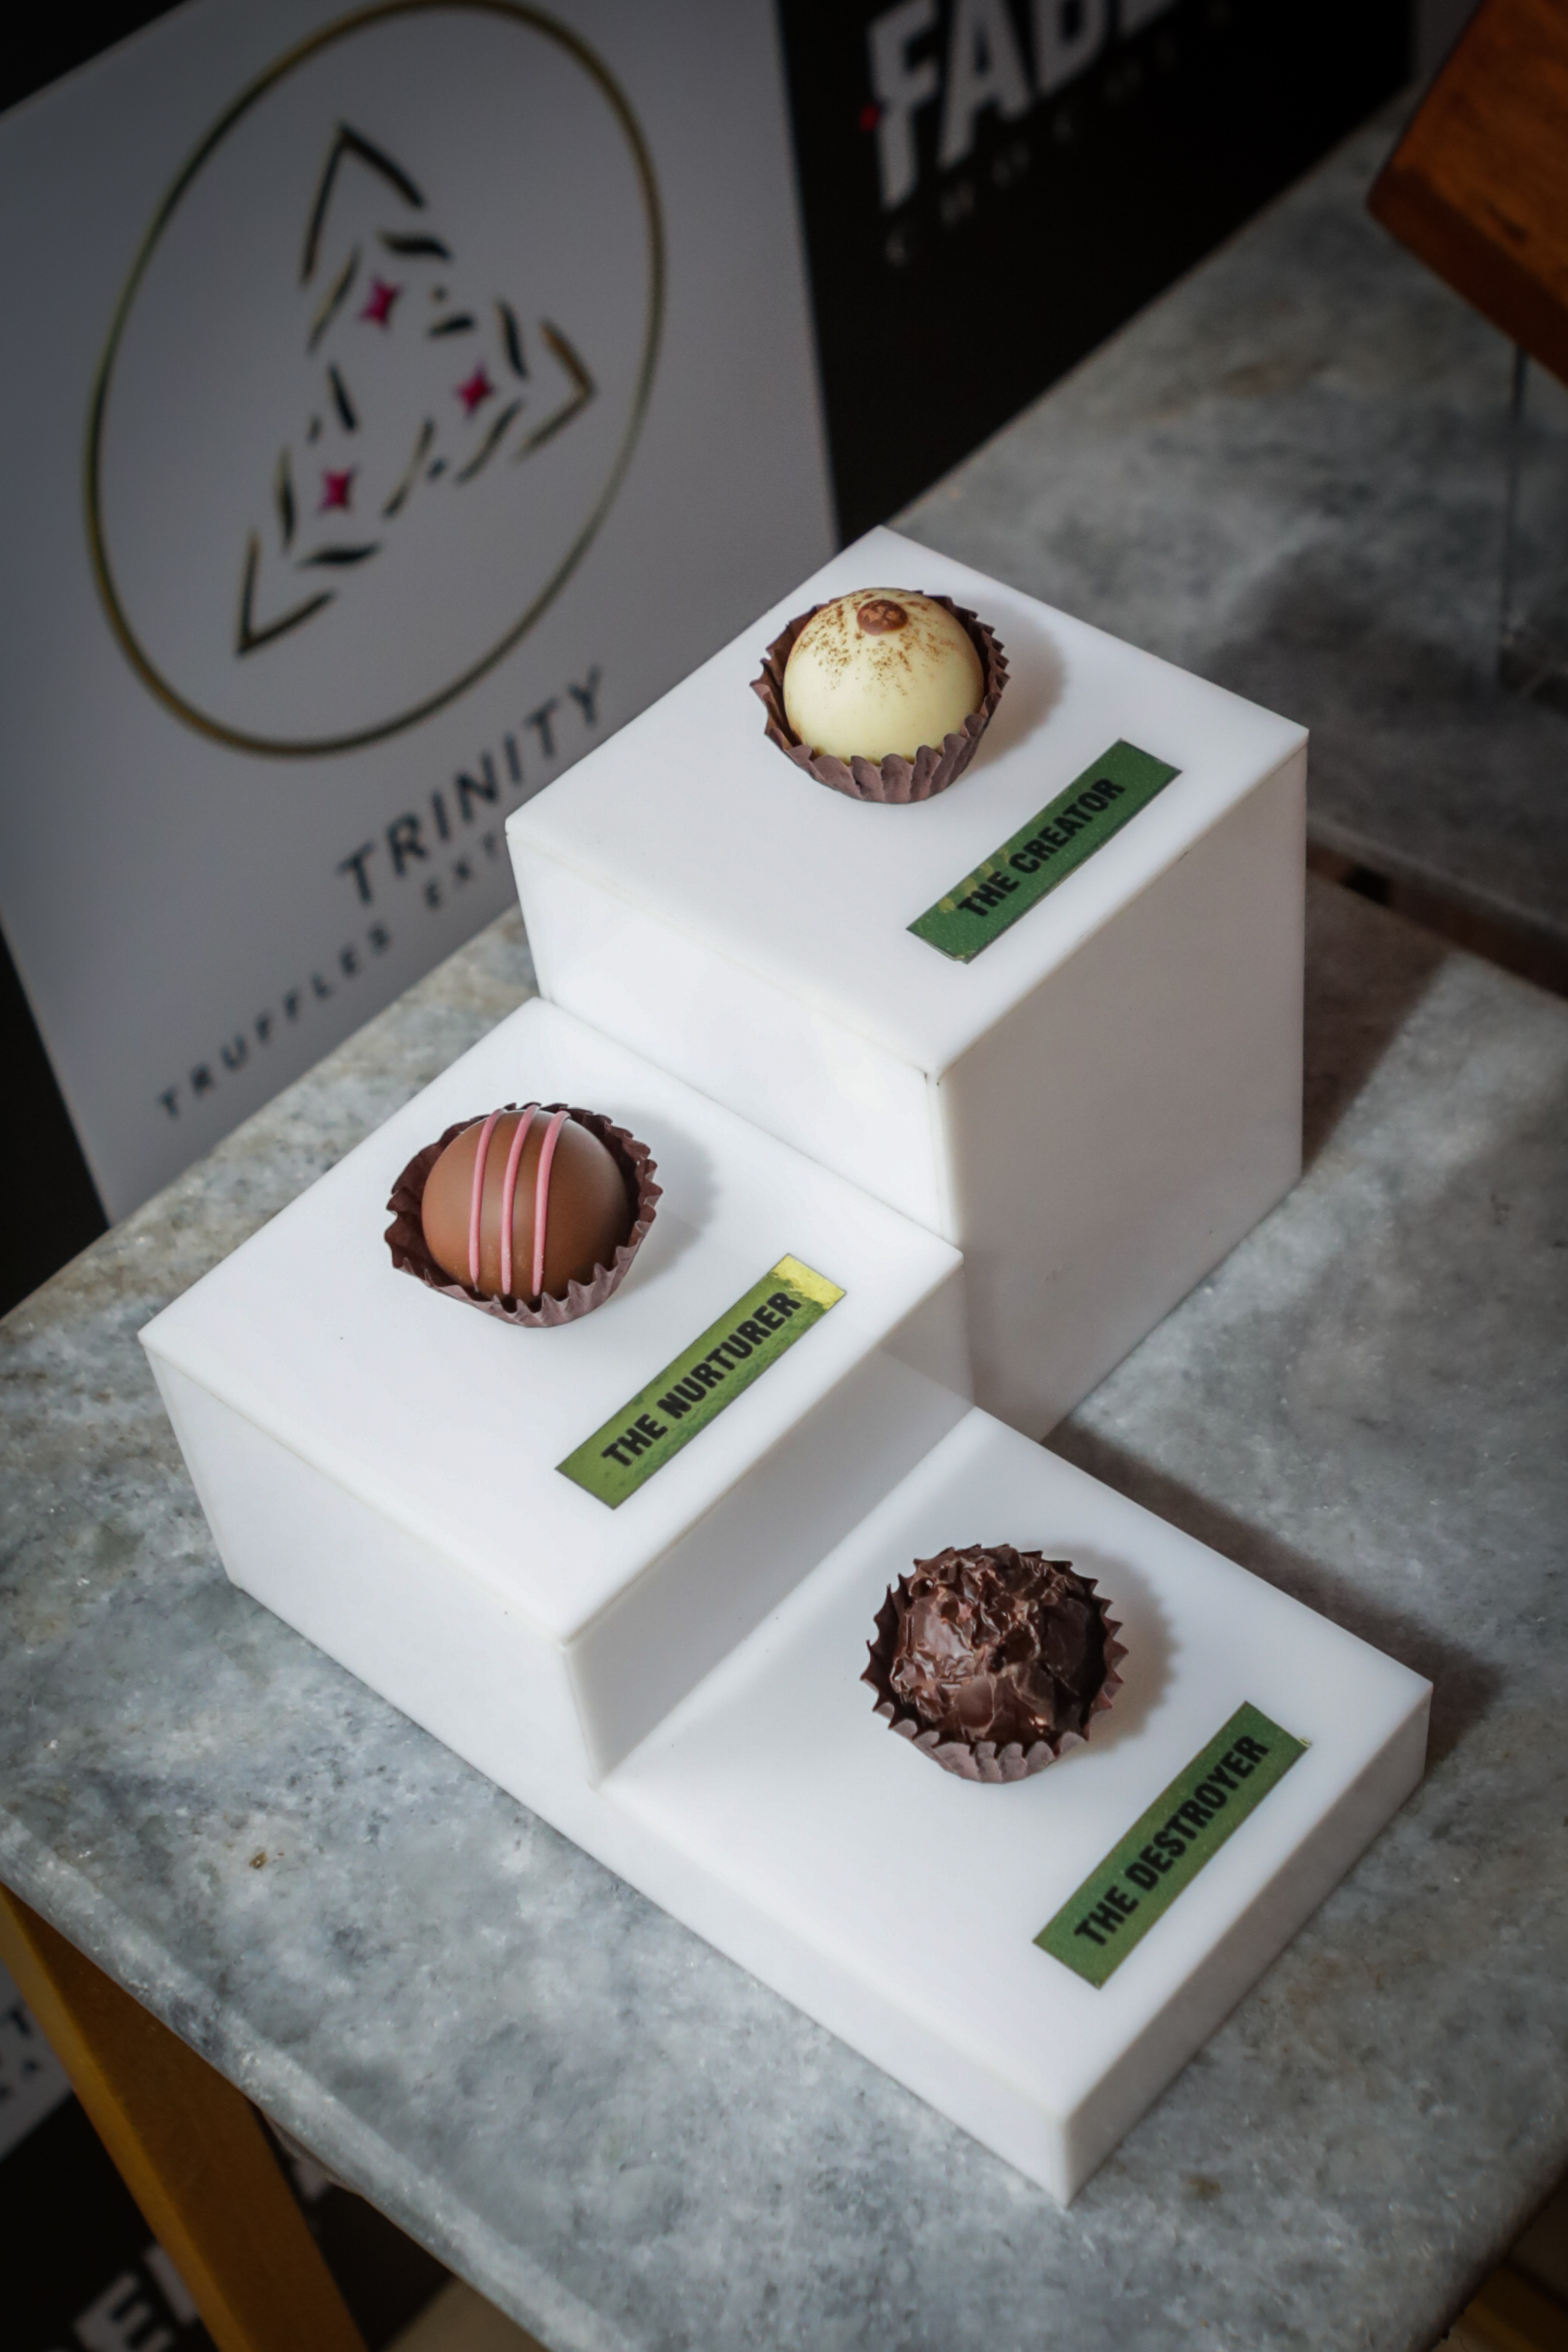 The Most Expensive Chocolate_Trinity – Truffles Extraordinaire’ by ITC’s Fabelle Exquisite Chocolates